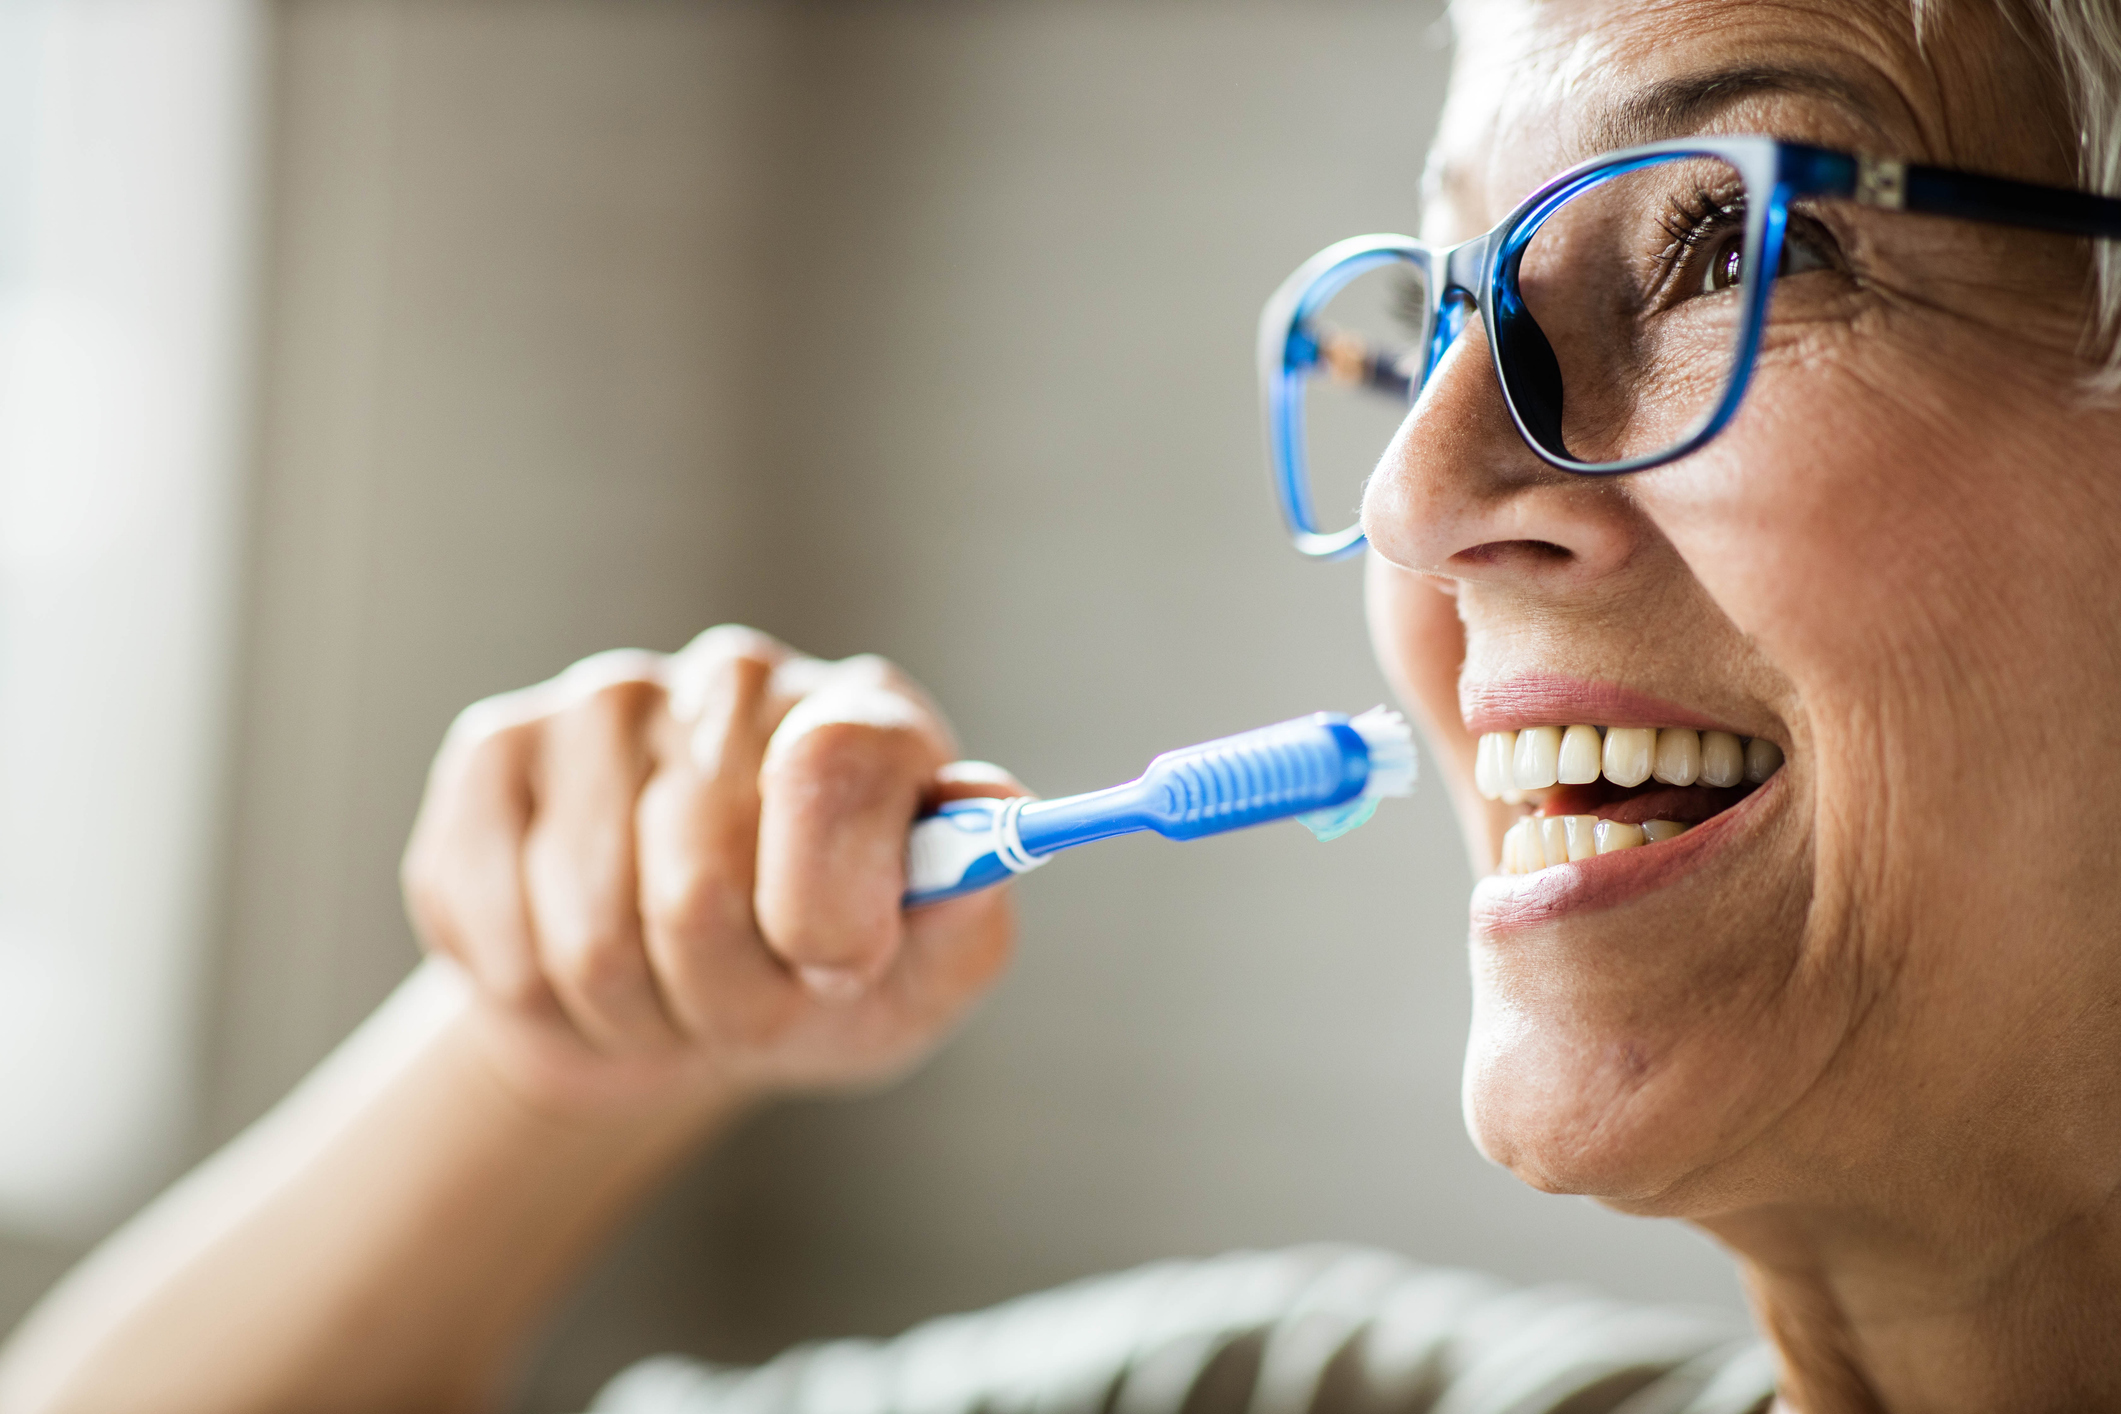 Use your toothbrush to fight cancer